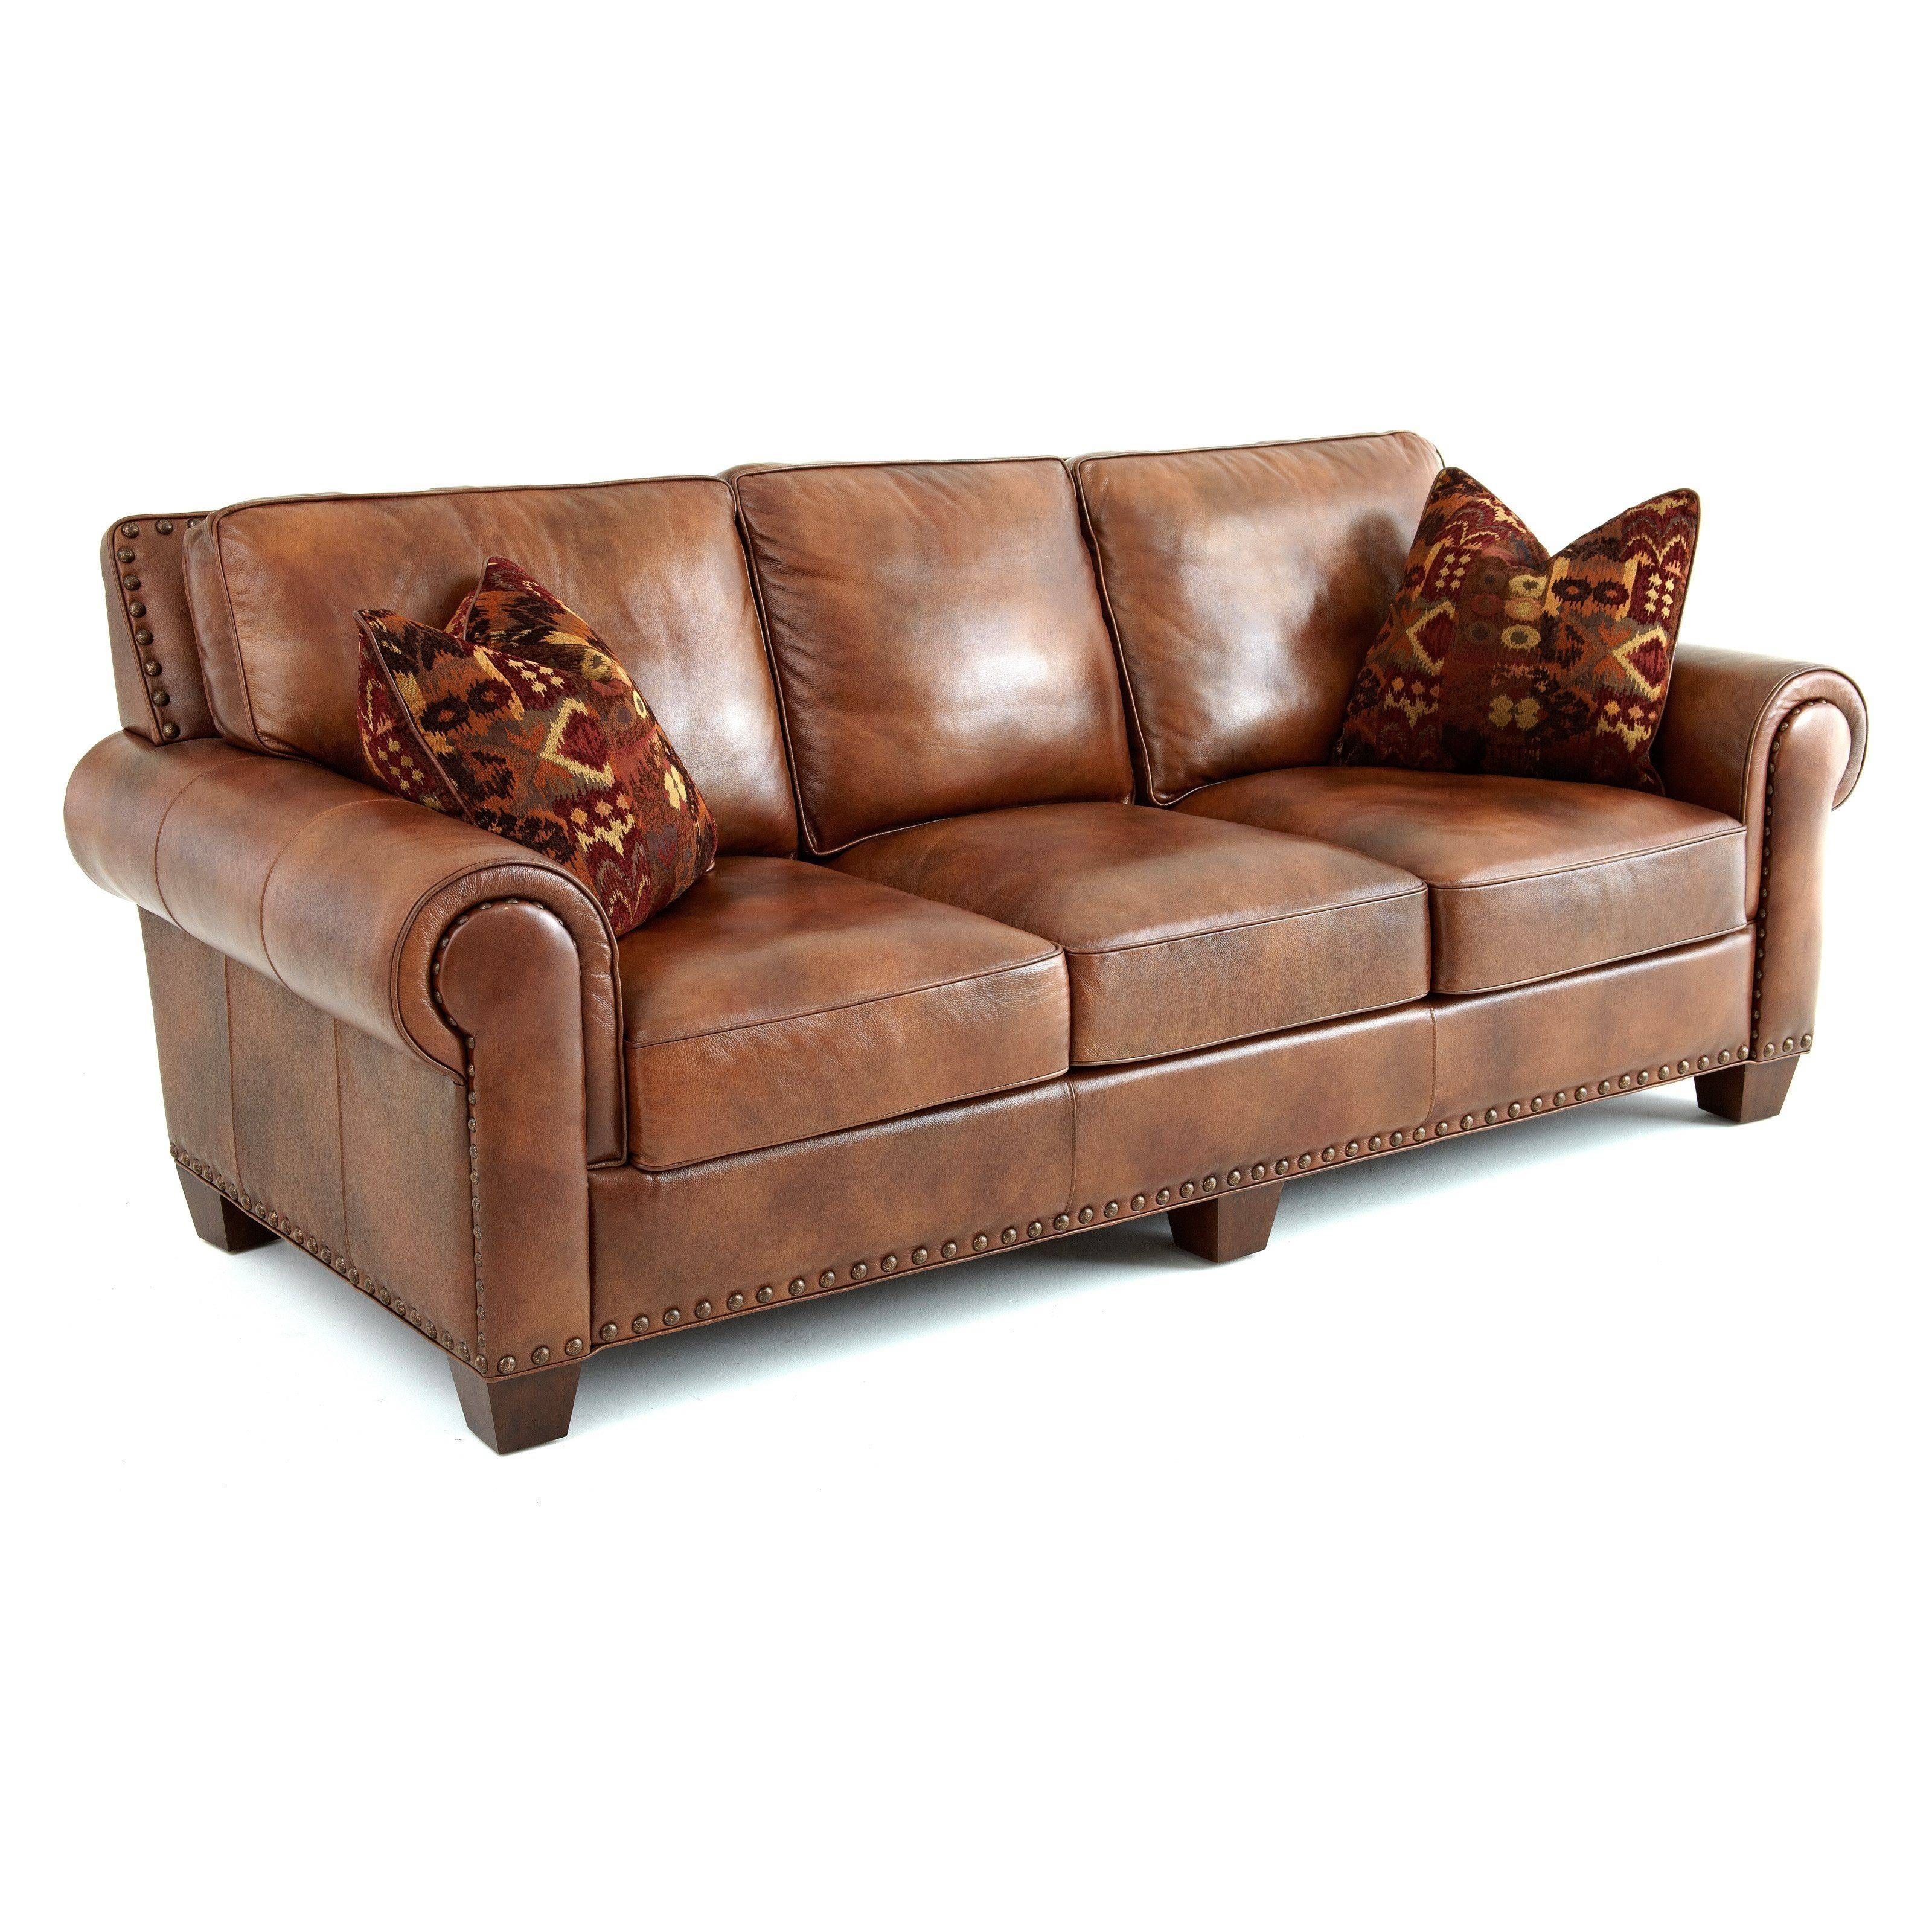 Sofas Center : Distressed Leather Sofa And Recliner Sectional Set Regarding Sofas For Dogs (Photo 8 of 30)